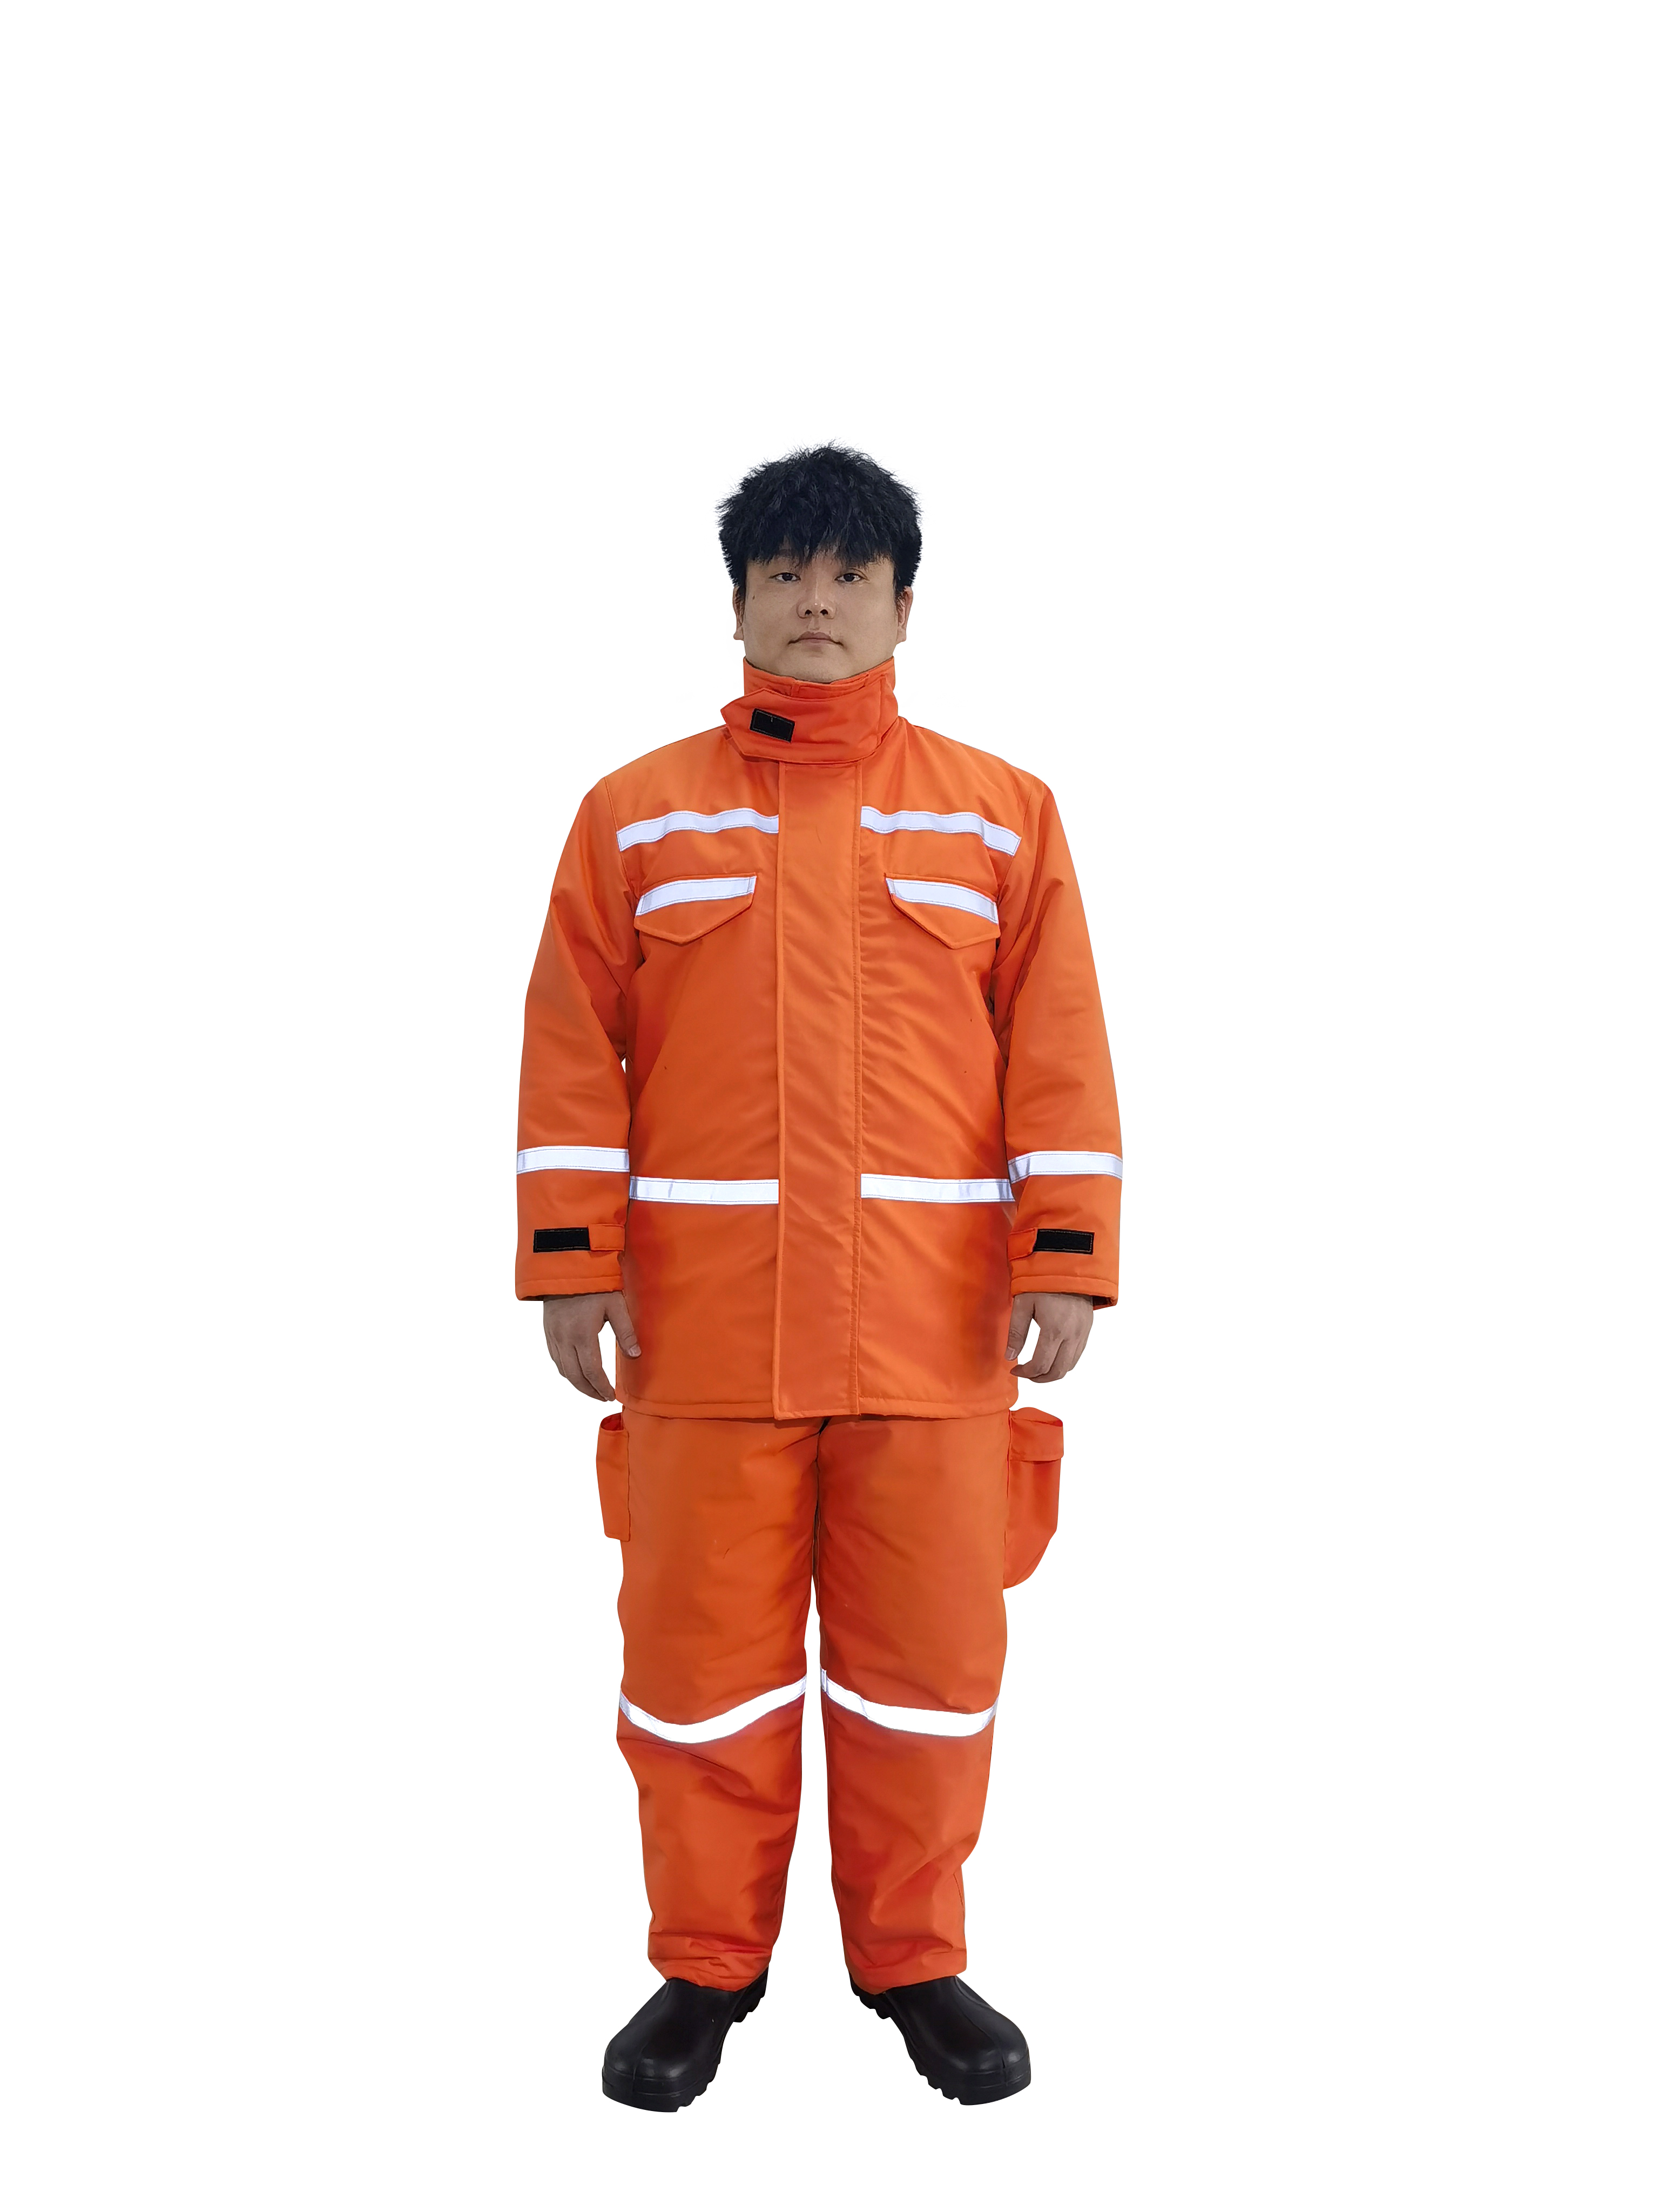 EN469(2020) FIRE FIGHTER'S PROTECTIVE CLOTHING 